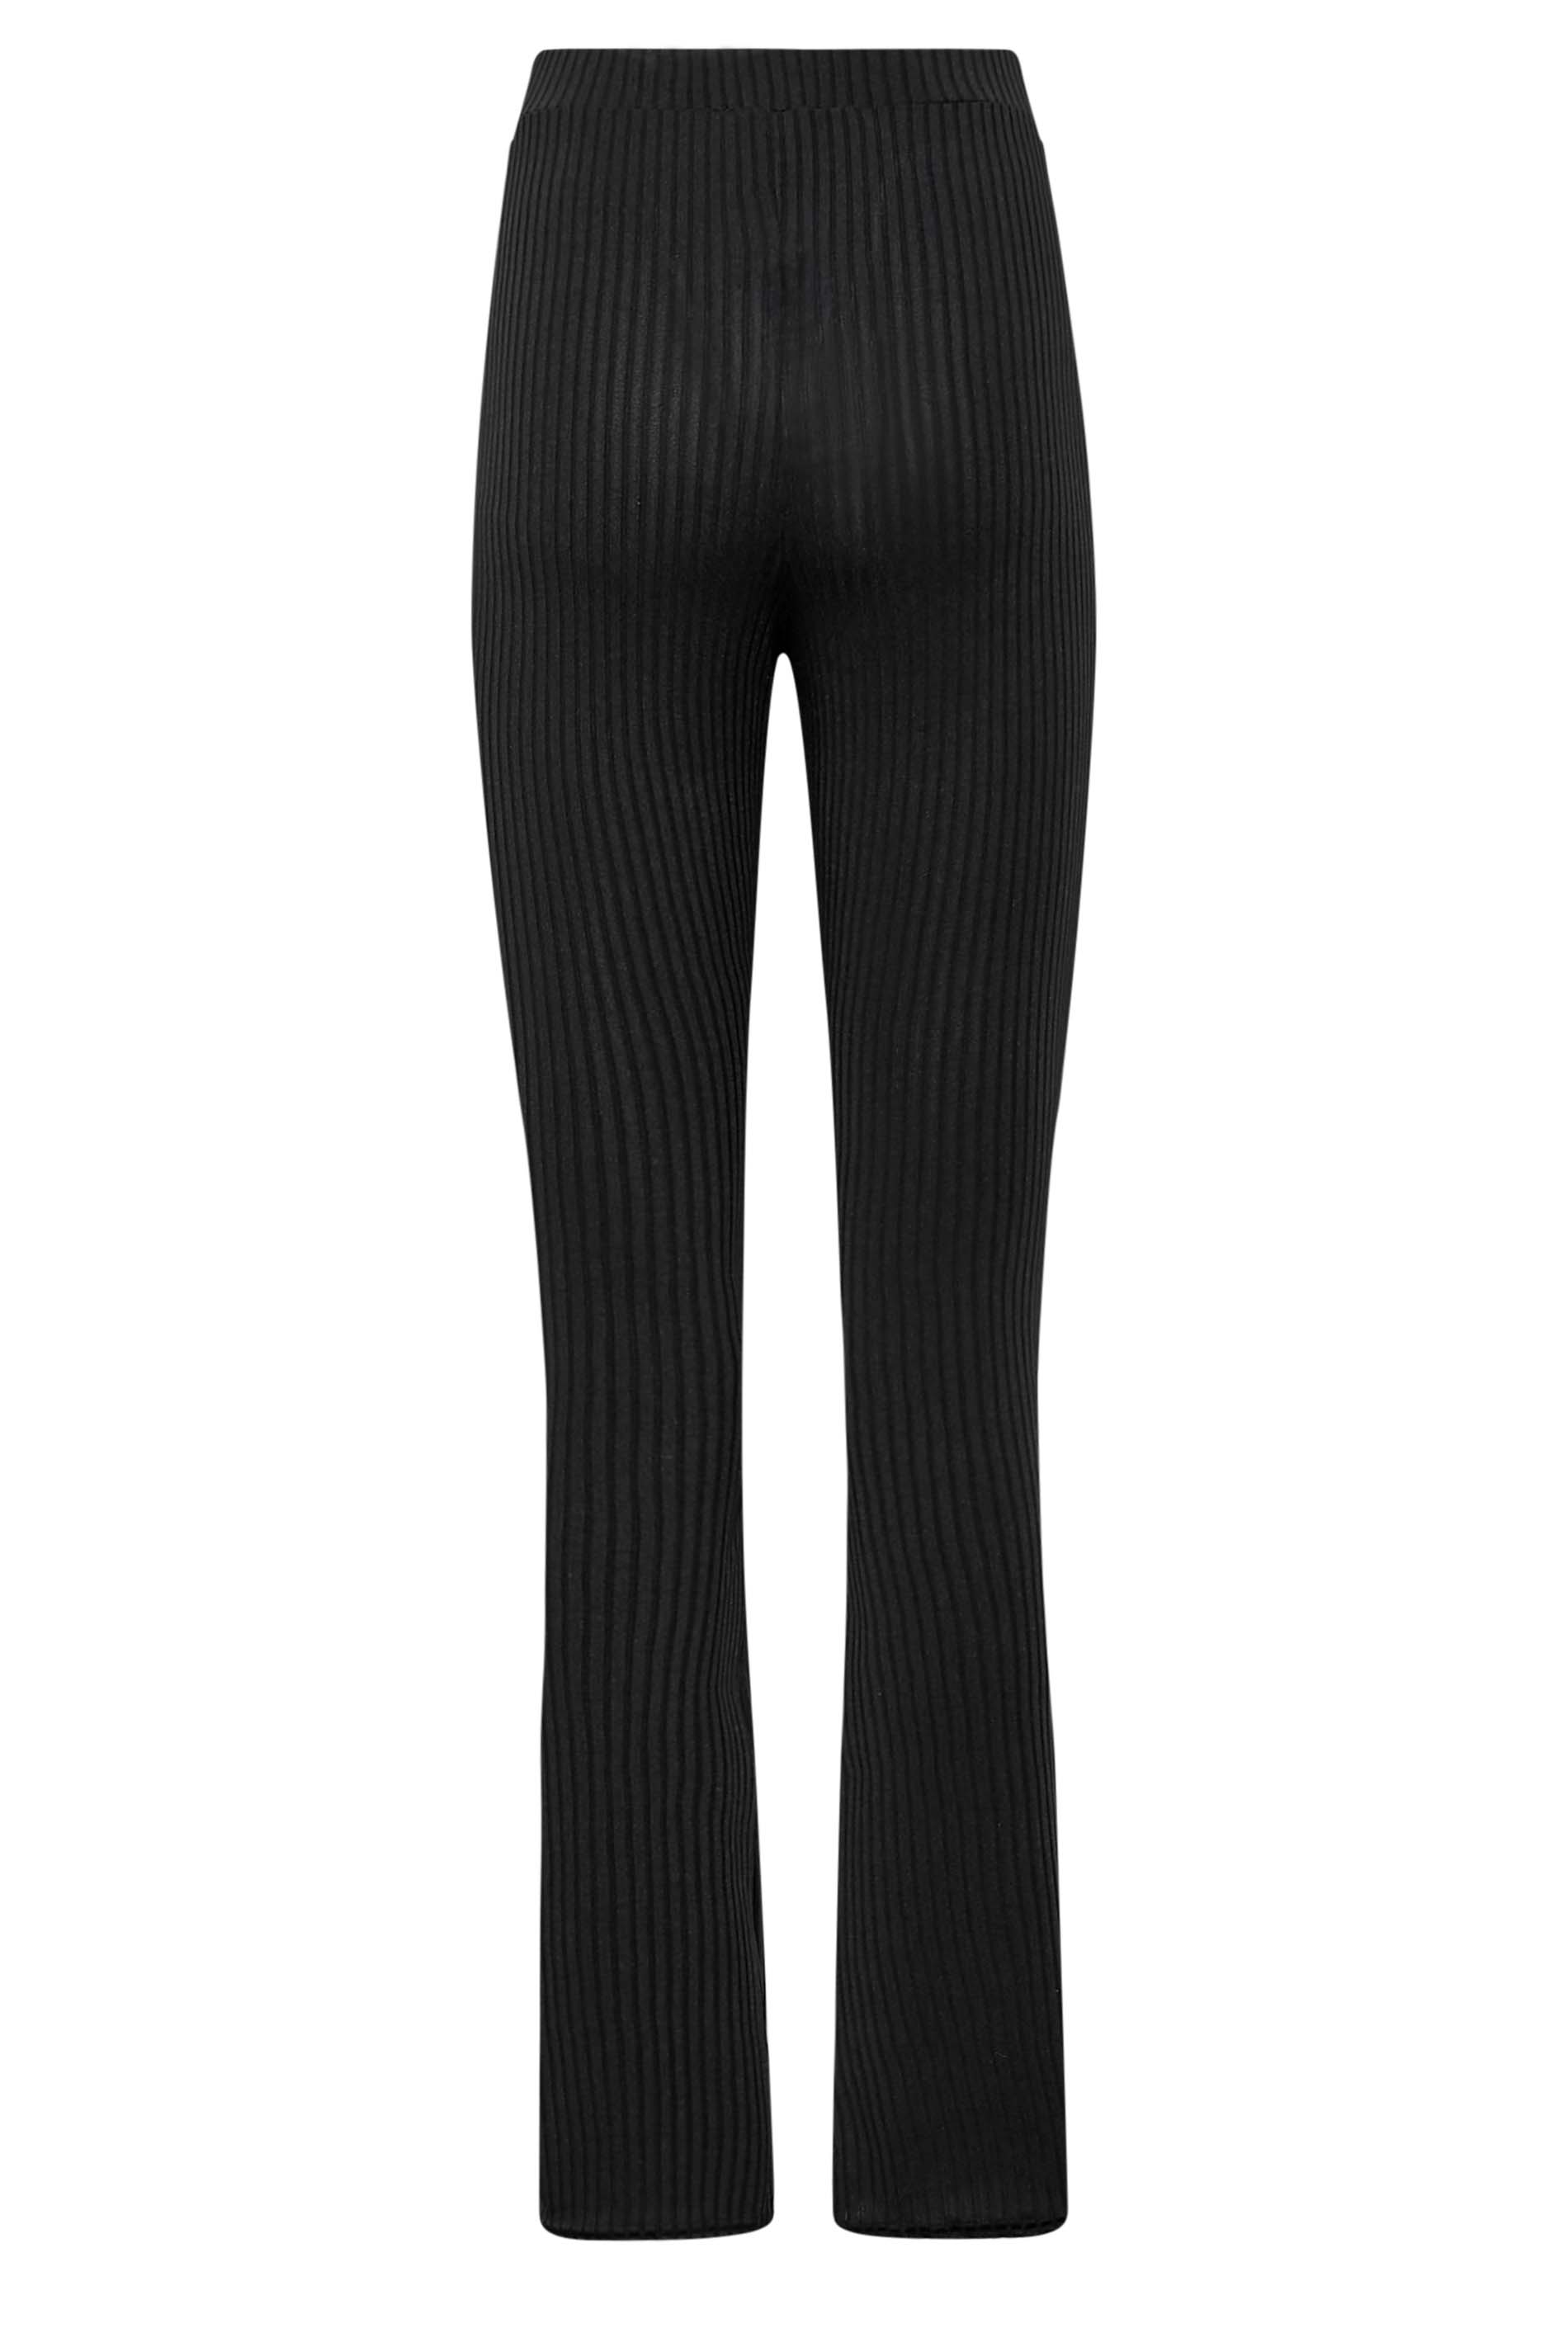 LTS Tall Women's Black Ribbed Flared Trousers | Long Tall Sally